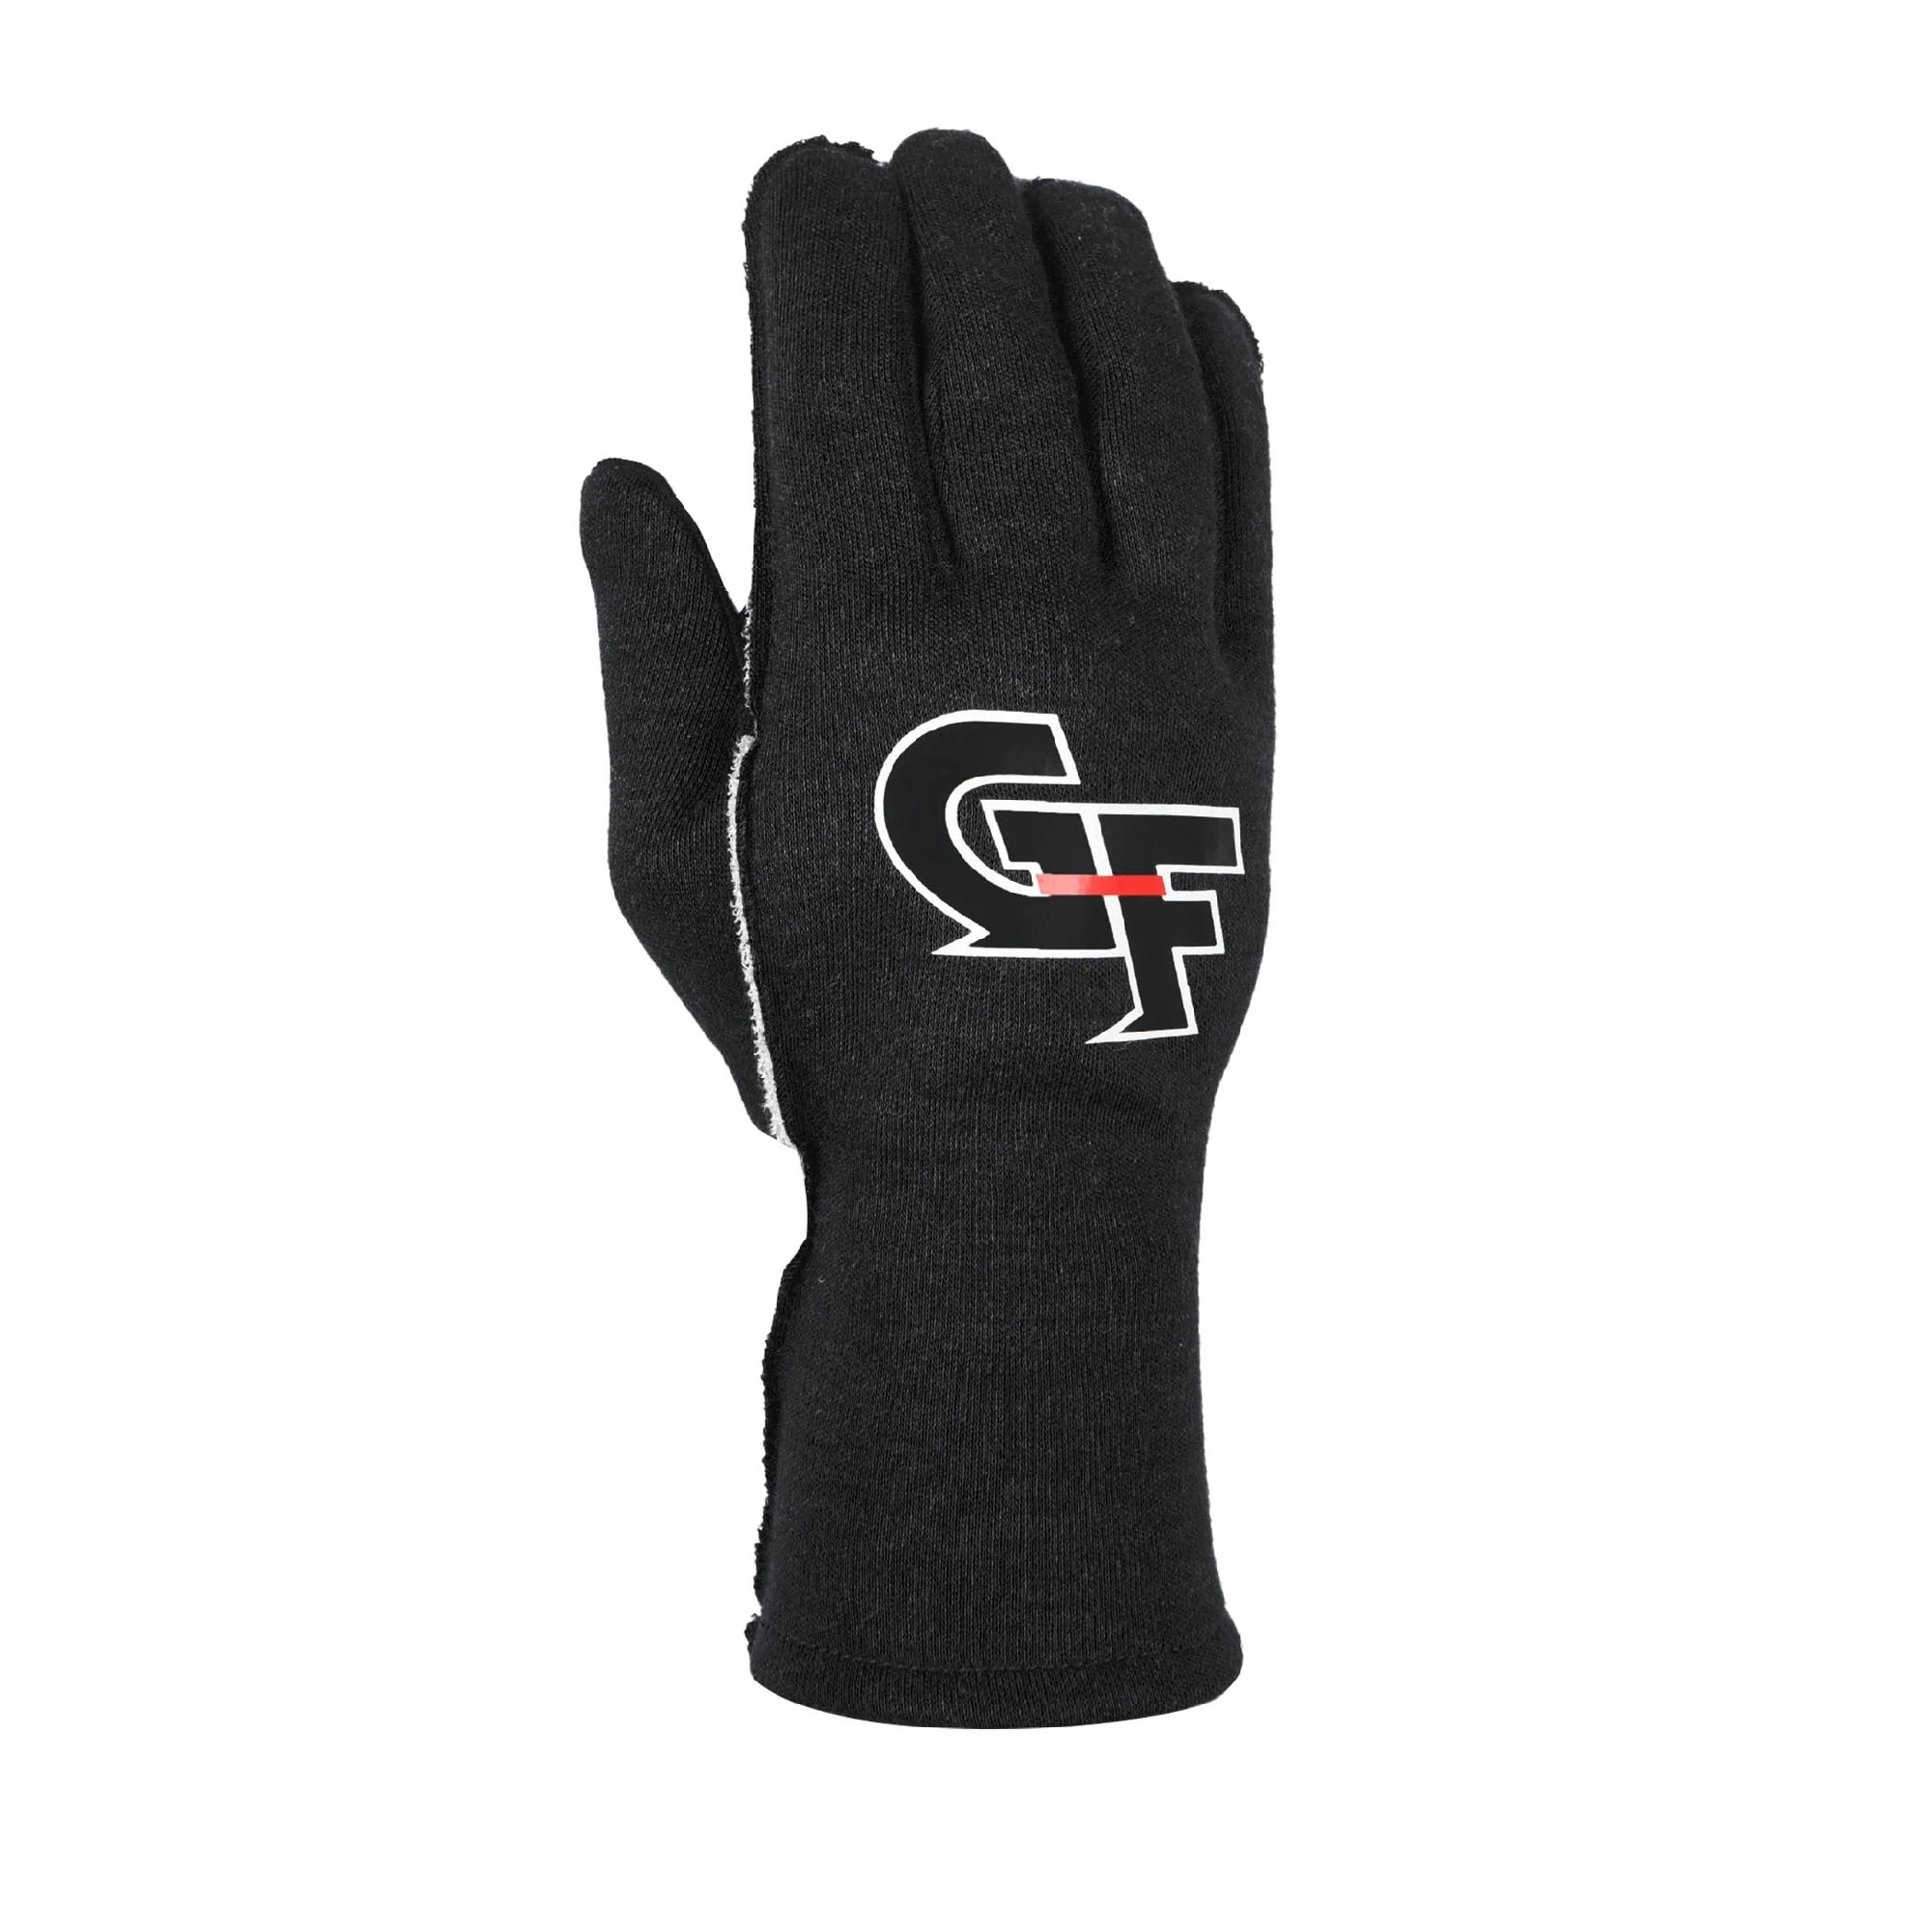 G-FORCE Gloves G-Limit X-Small Black